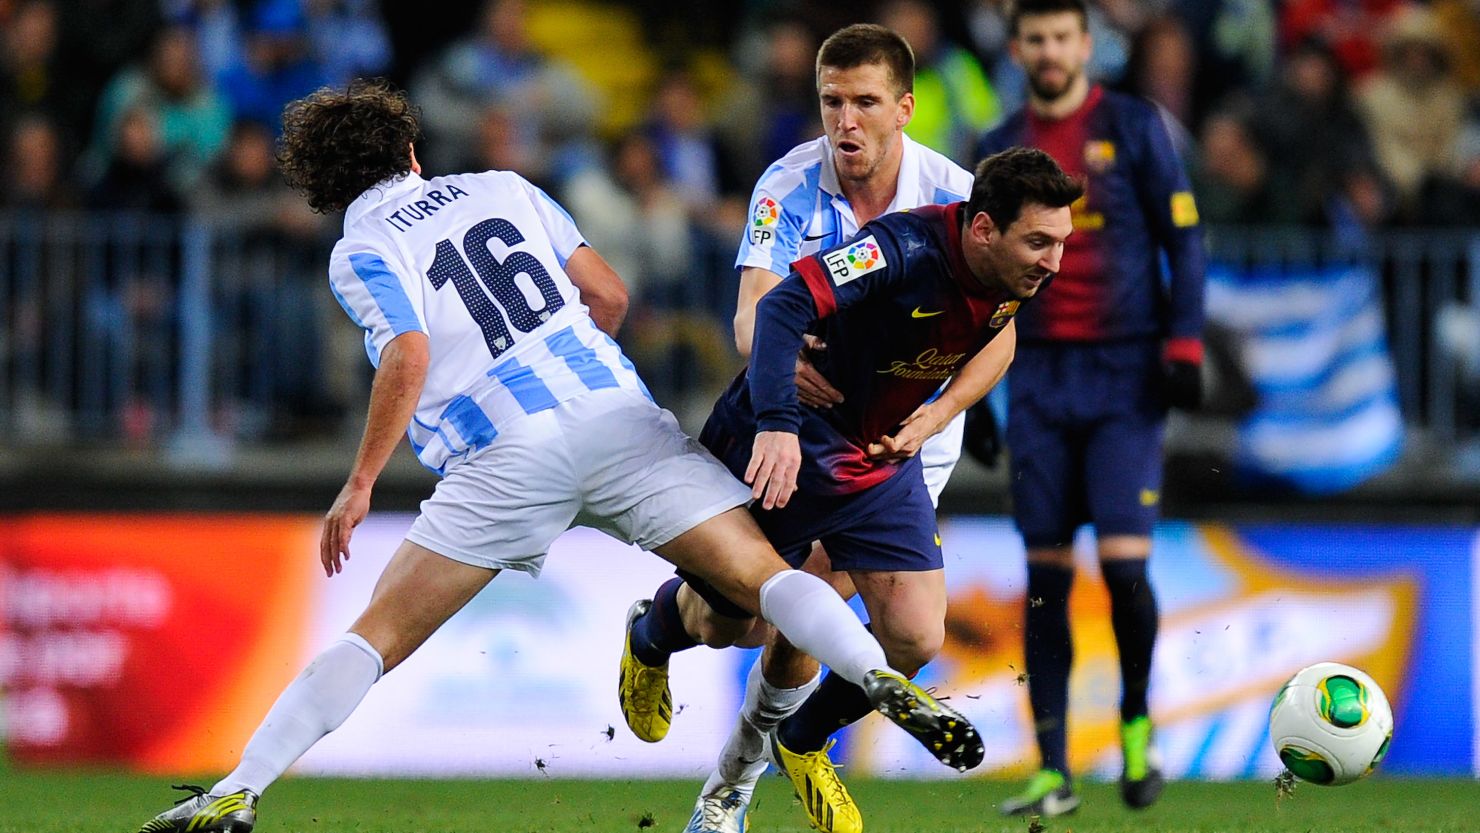 Leo Messi scored his 40th goal of the season as Barcelona defeated Malaga 4-2 in the Copa del Rey.